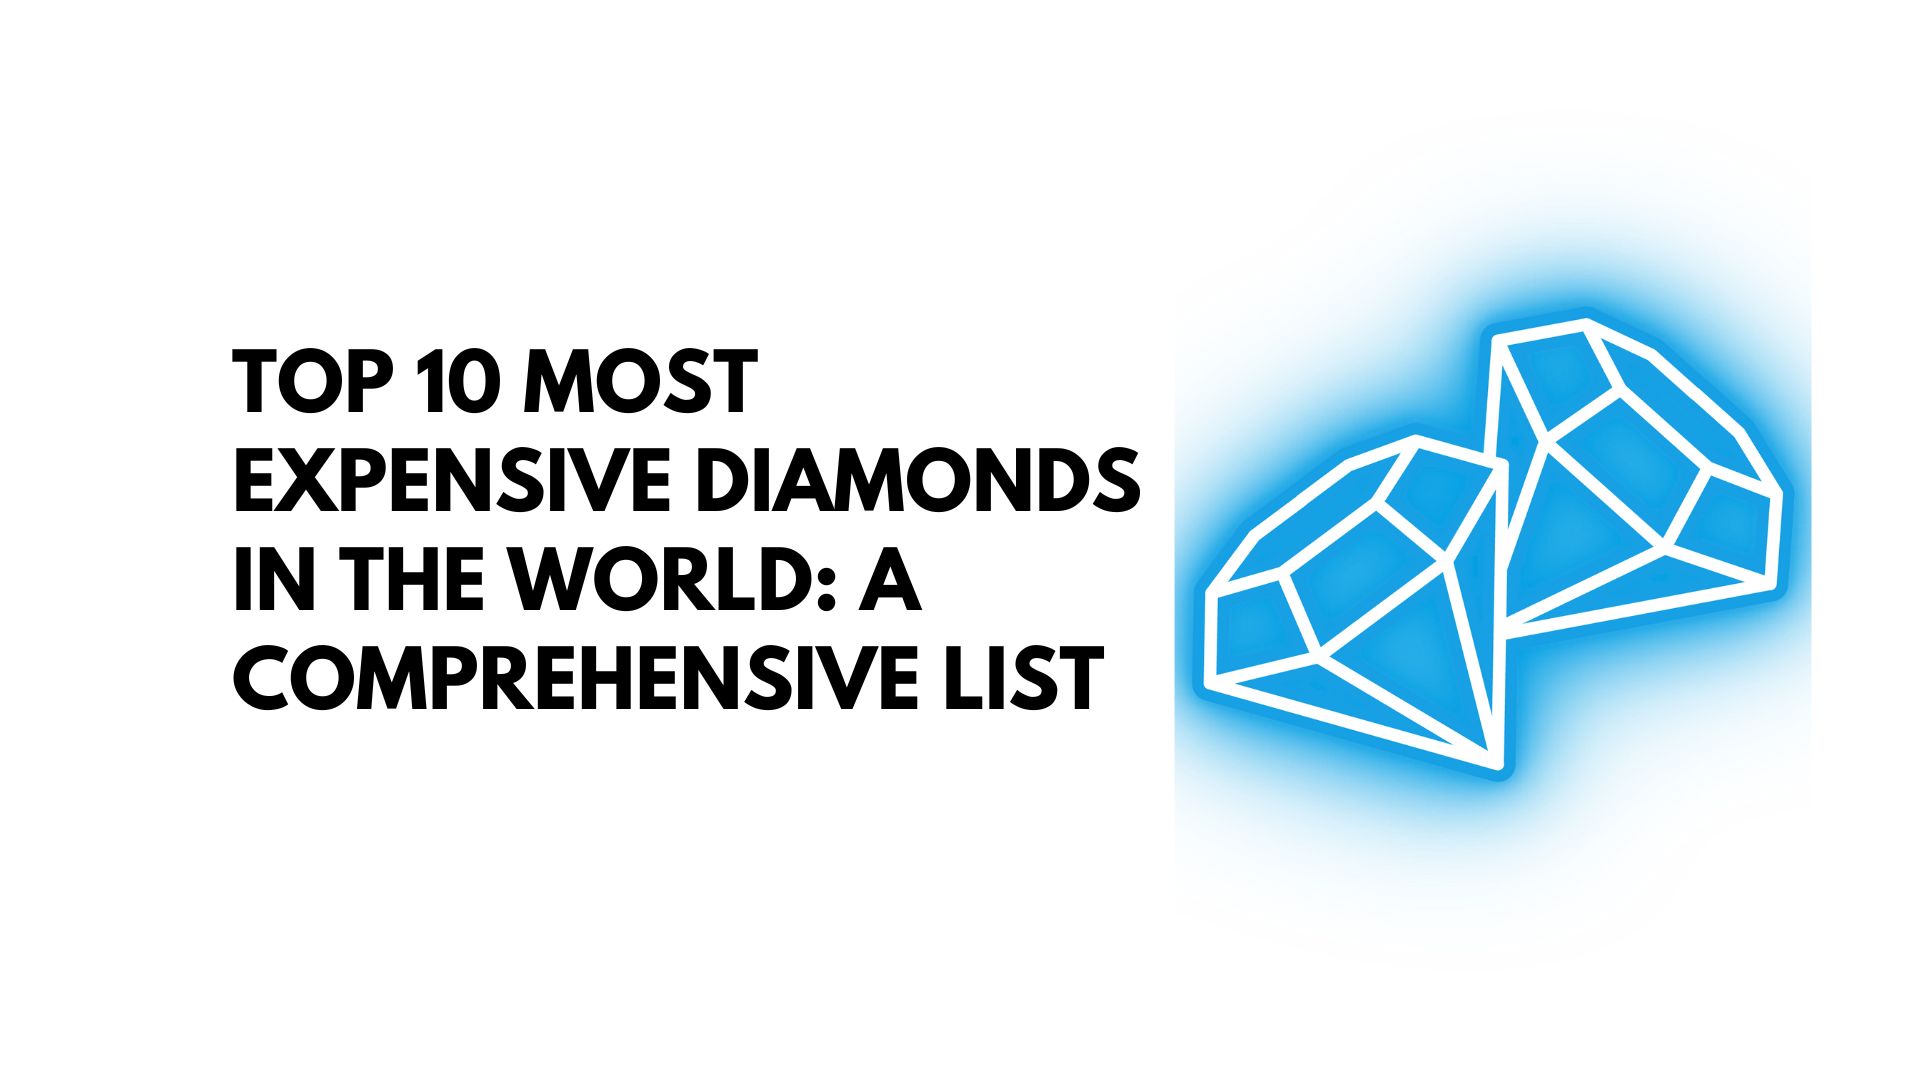 Top 10 Most Expensive Diamonds in the World: A Comprehensive List